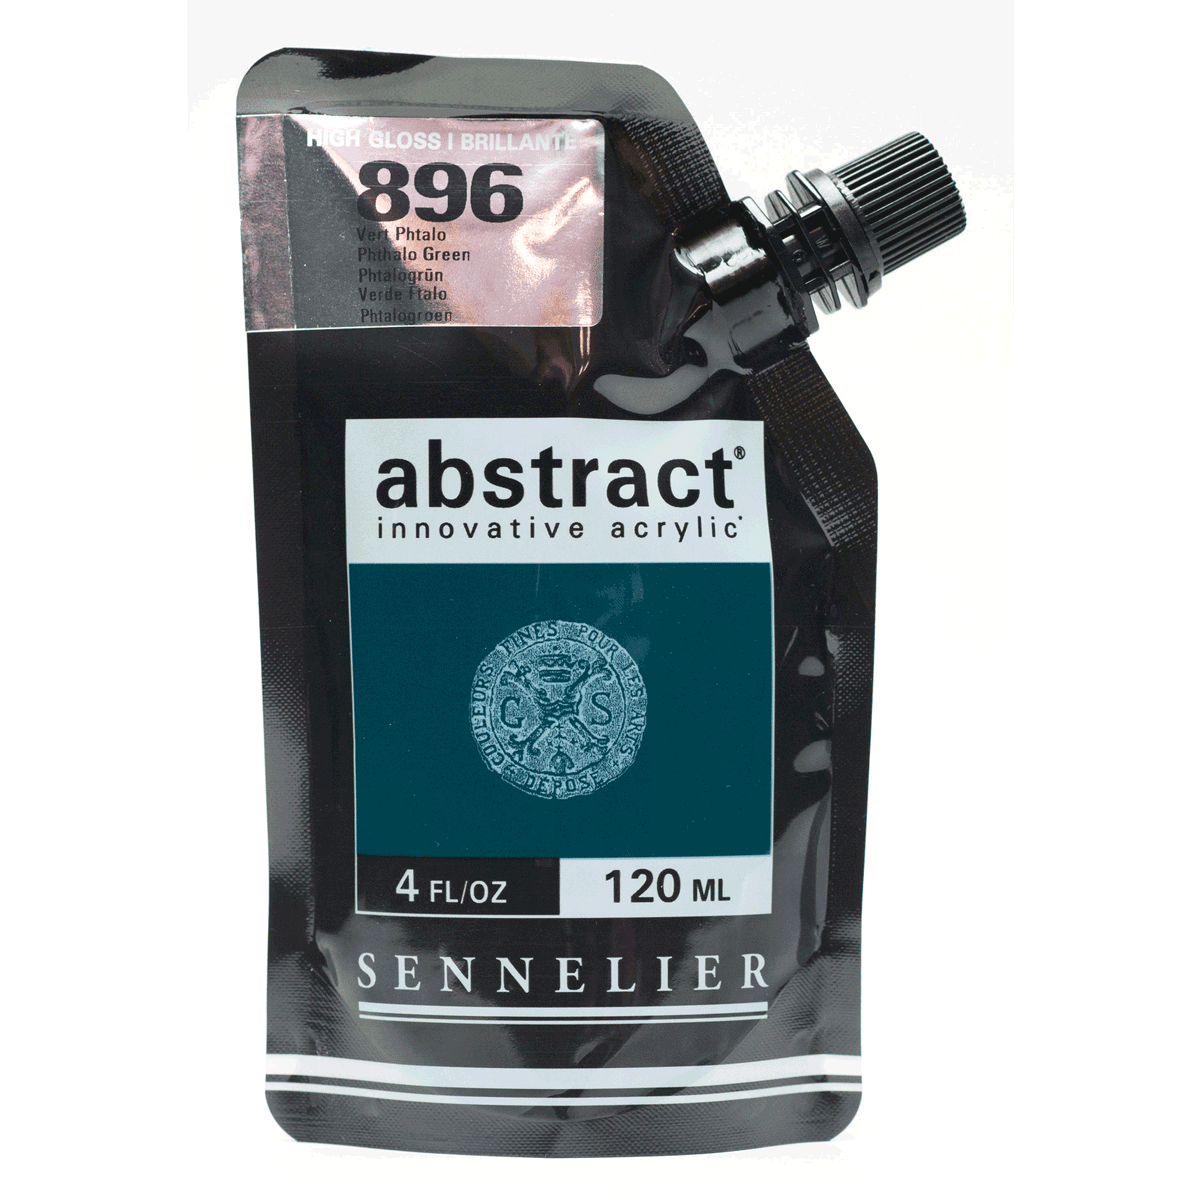 Abstract Acrylic Pouch - High Gloss 896B Phthalo Green 120ml